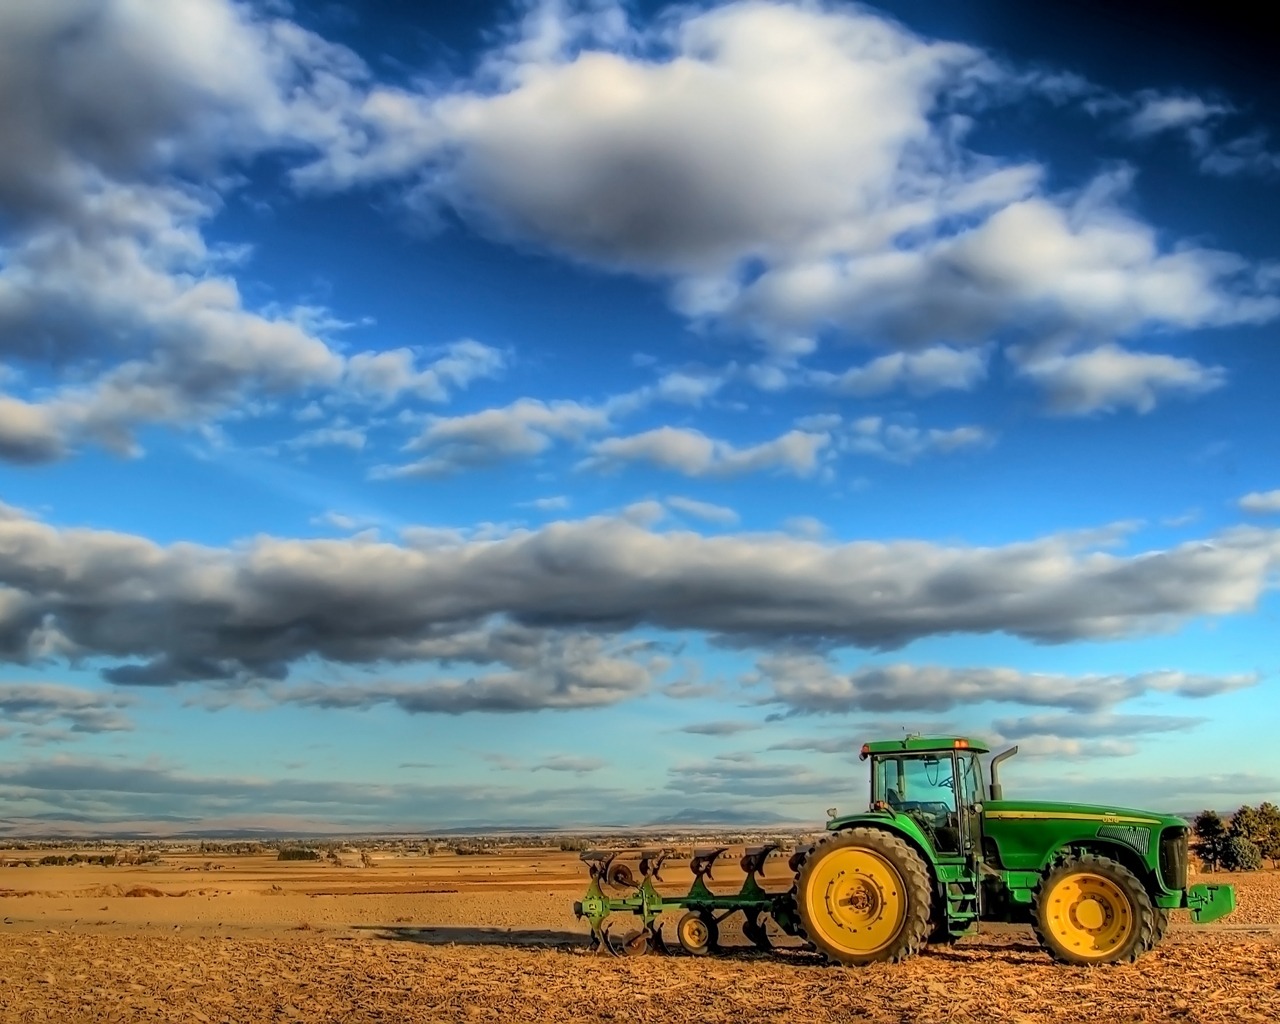 Tractor Wallpaper Miscellaneous Other Wallpapers in jpg format for